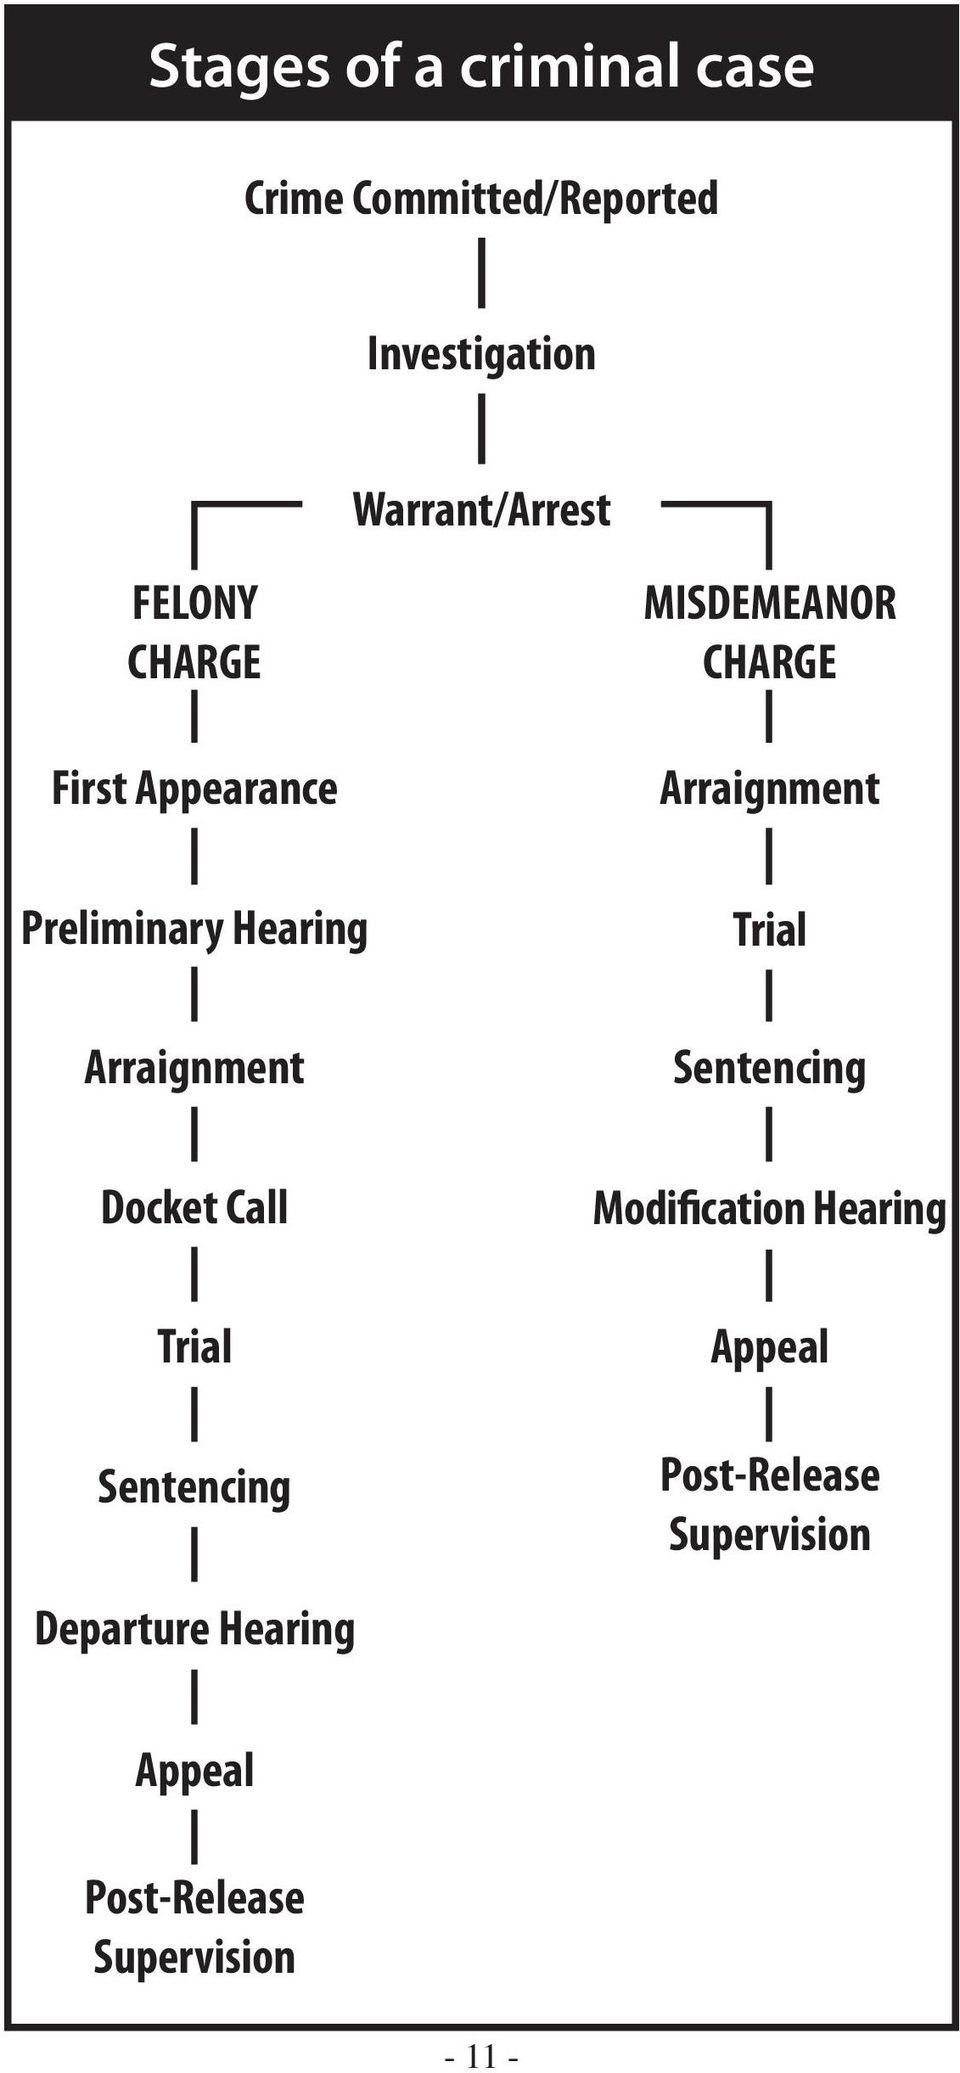 Sentencing MISDEMEANOR CHARGE Arraignment Trial Sentencing Modification Hearing